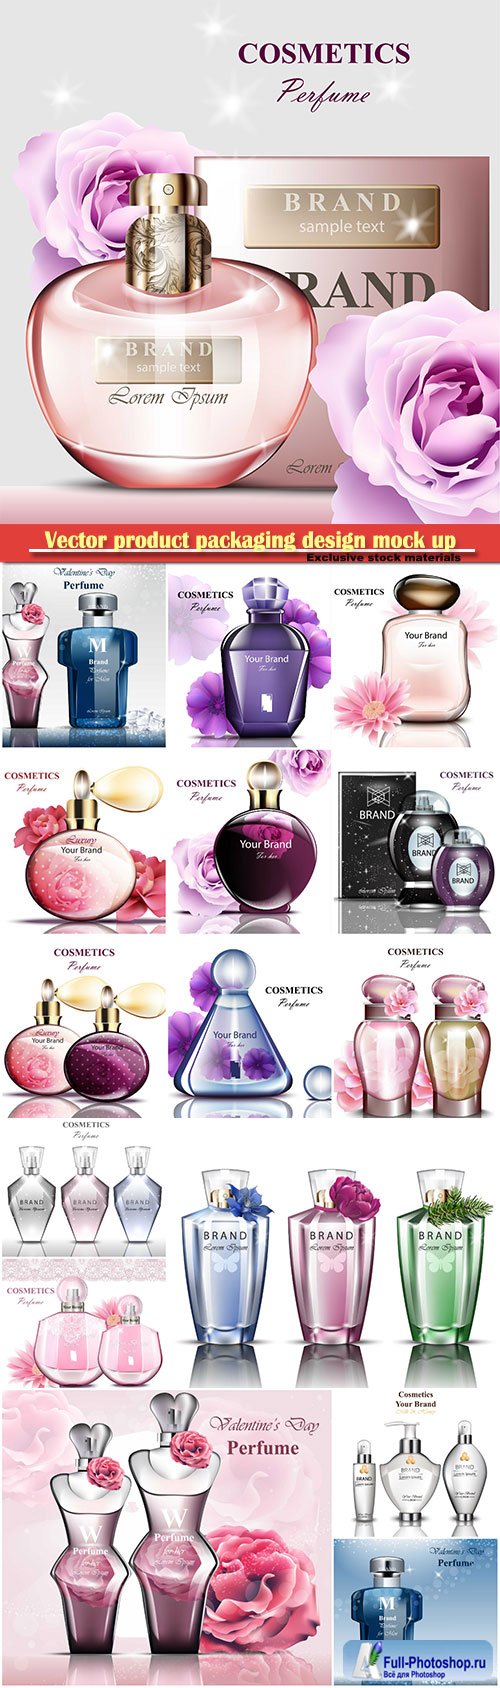 Realistic vector product packaging design mock up, perfume bottle